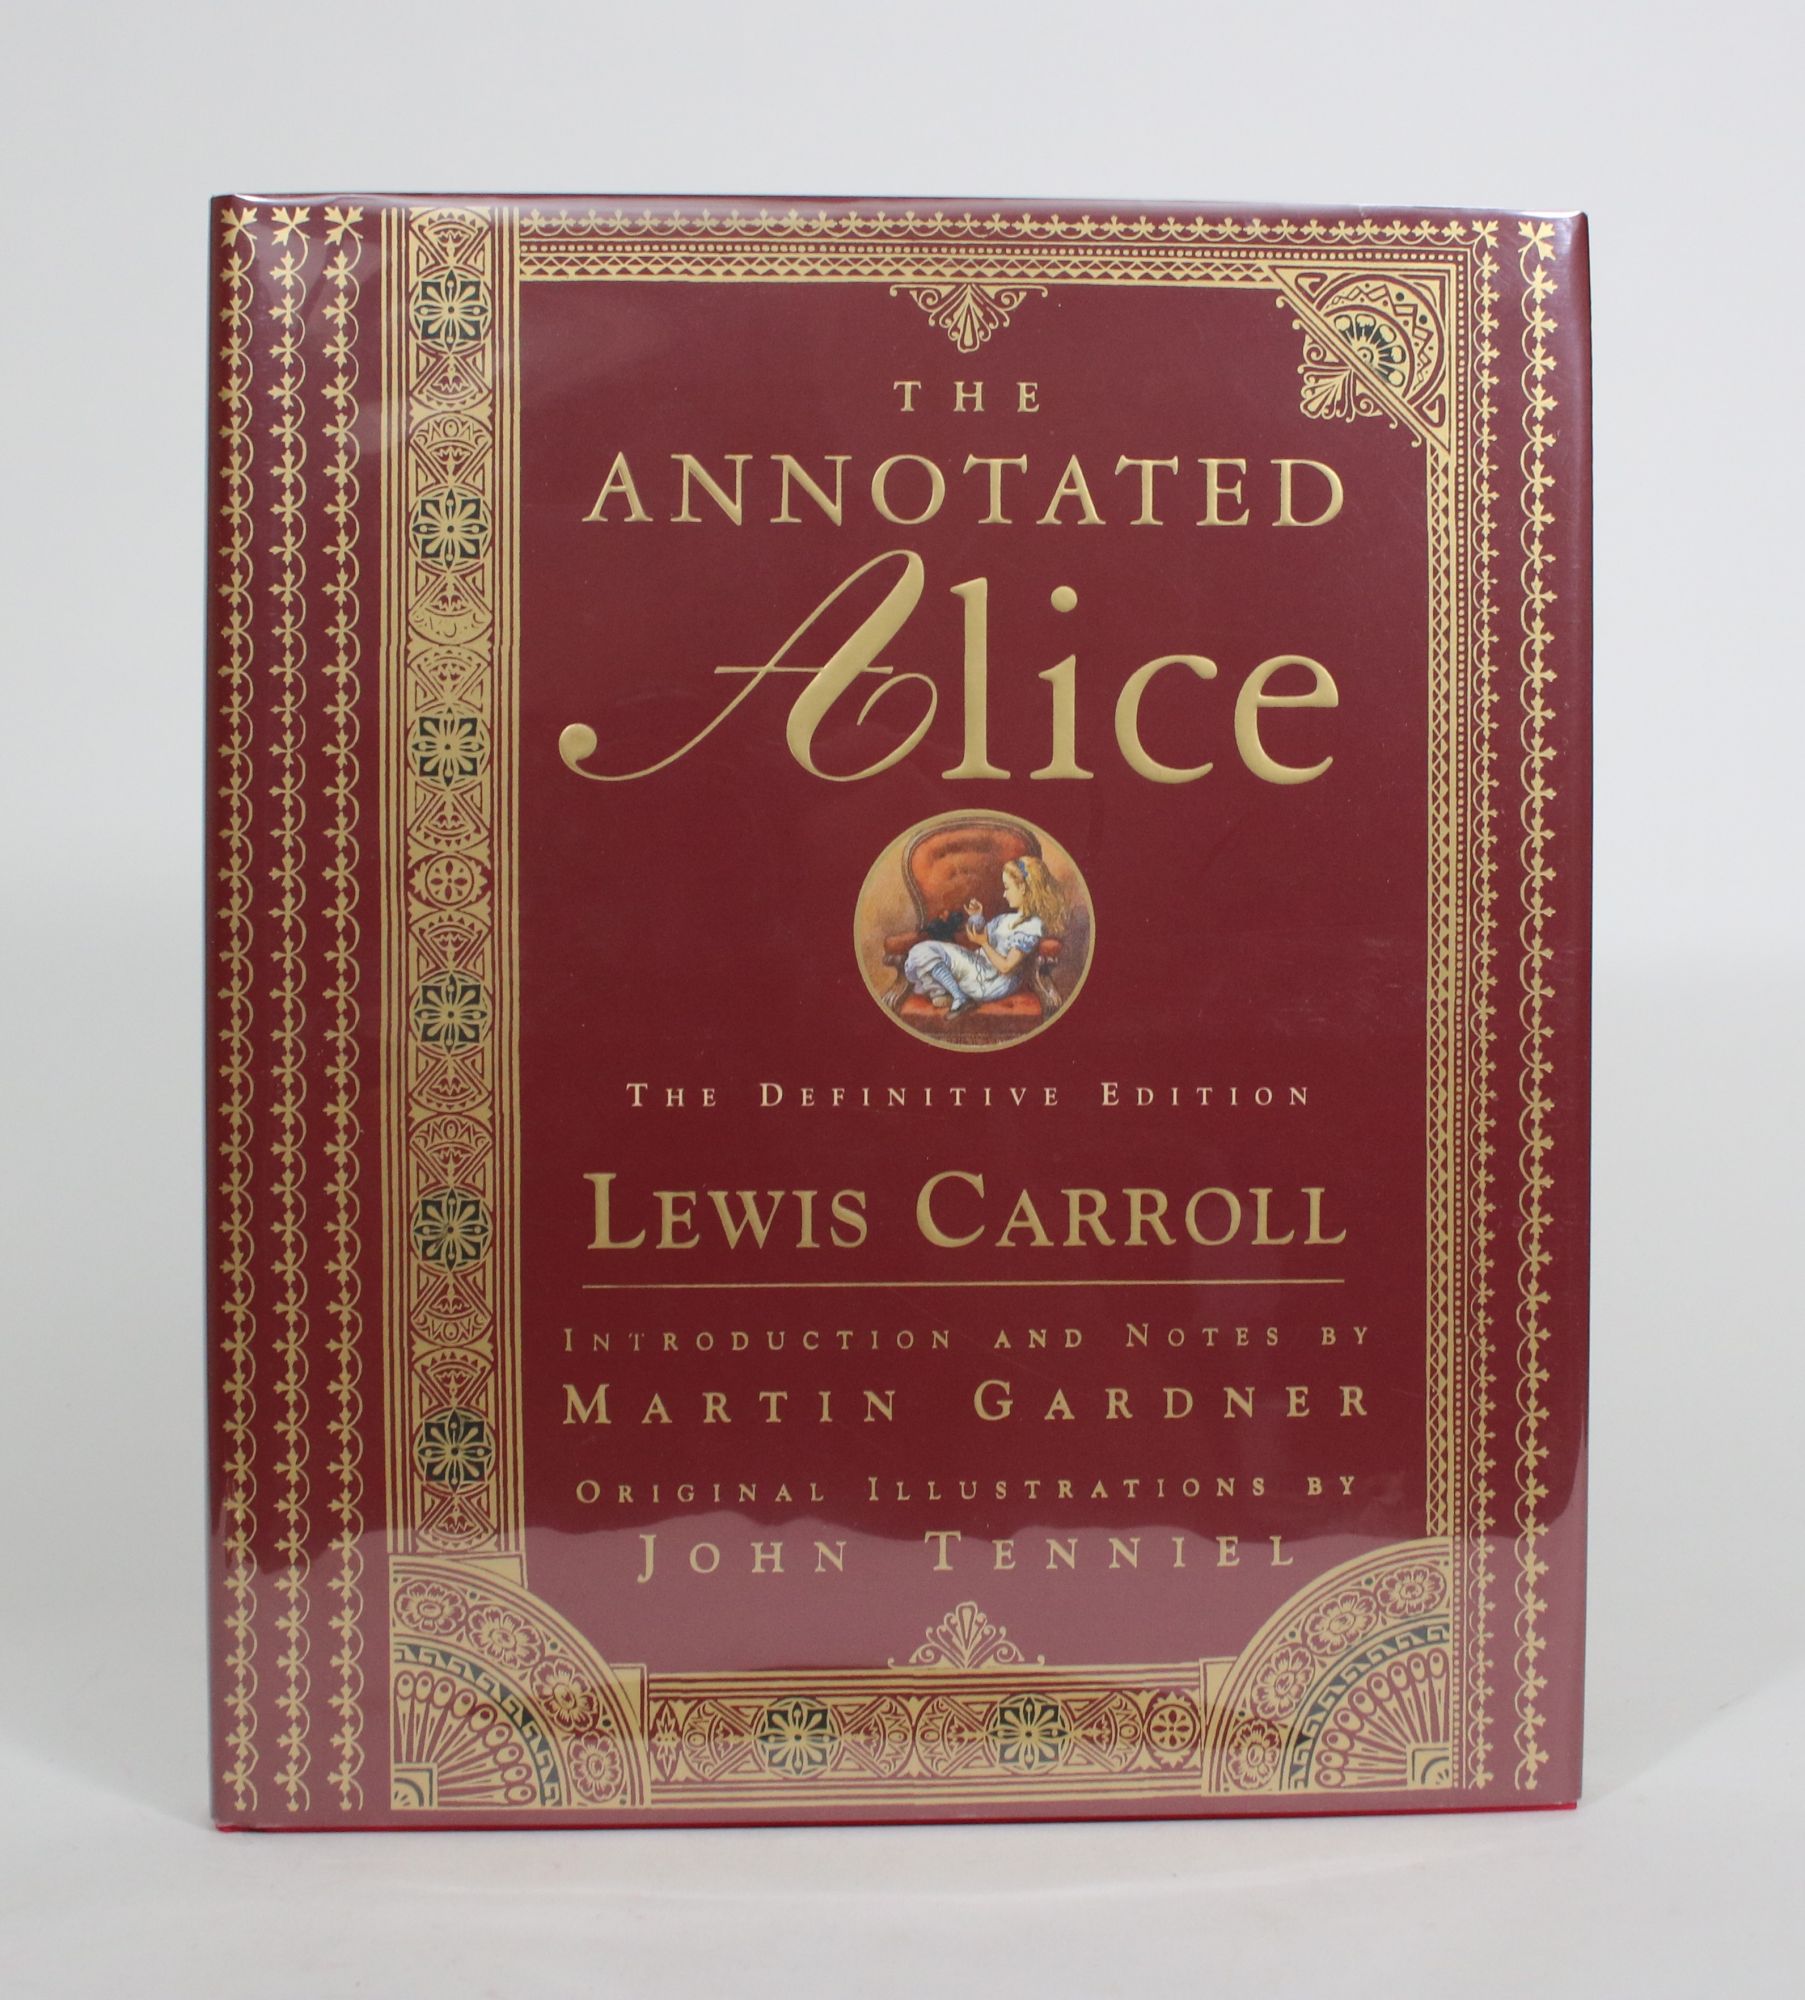 The Annotated Alice: The Definitive Edition - Carroll, Lewis; Gardner, Martin (introduction and notes)